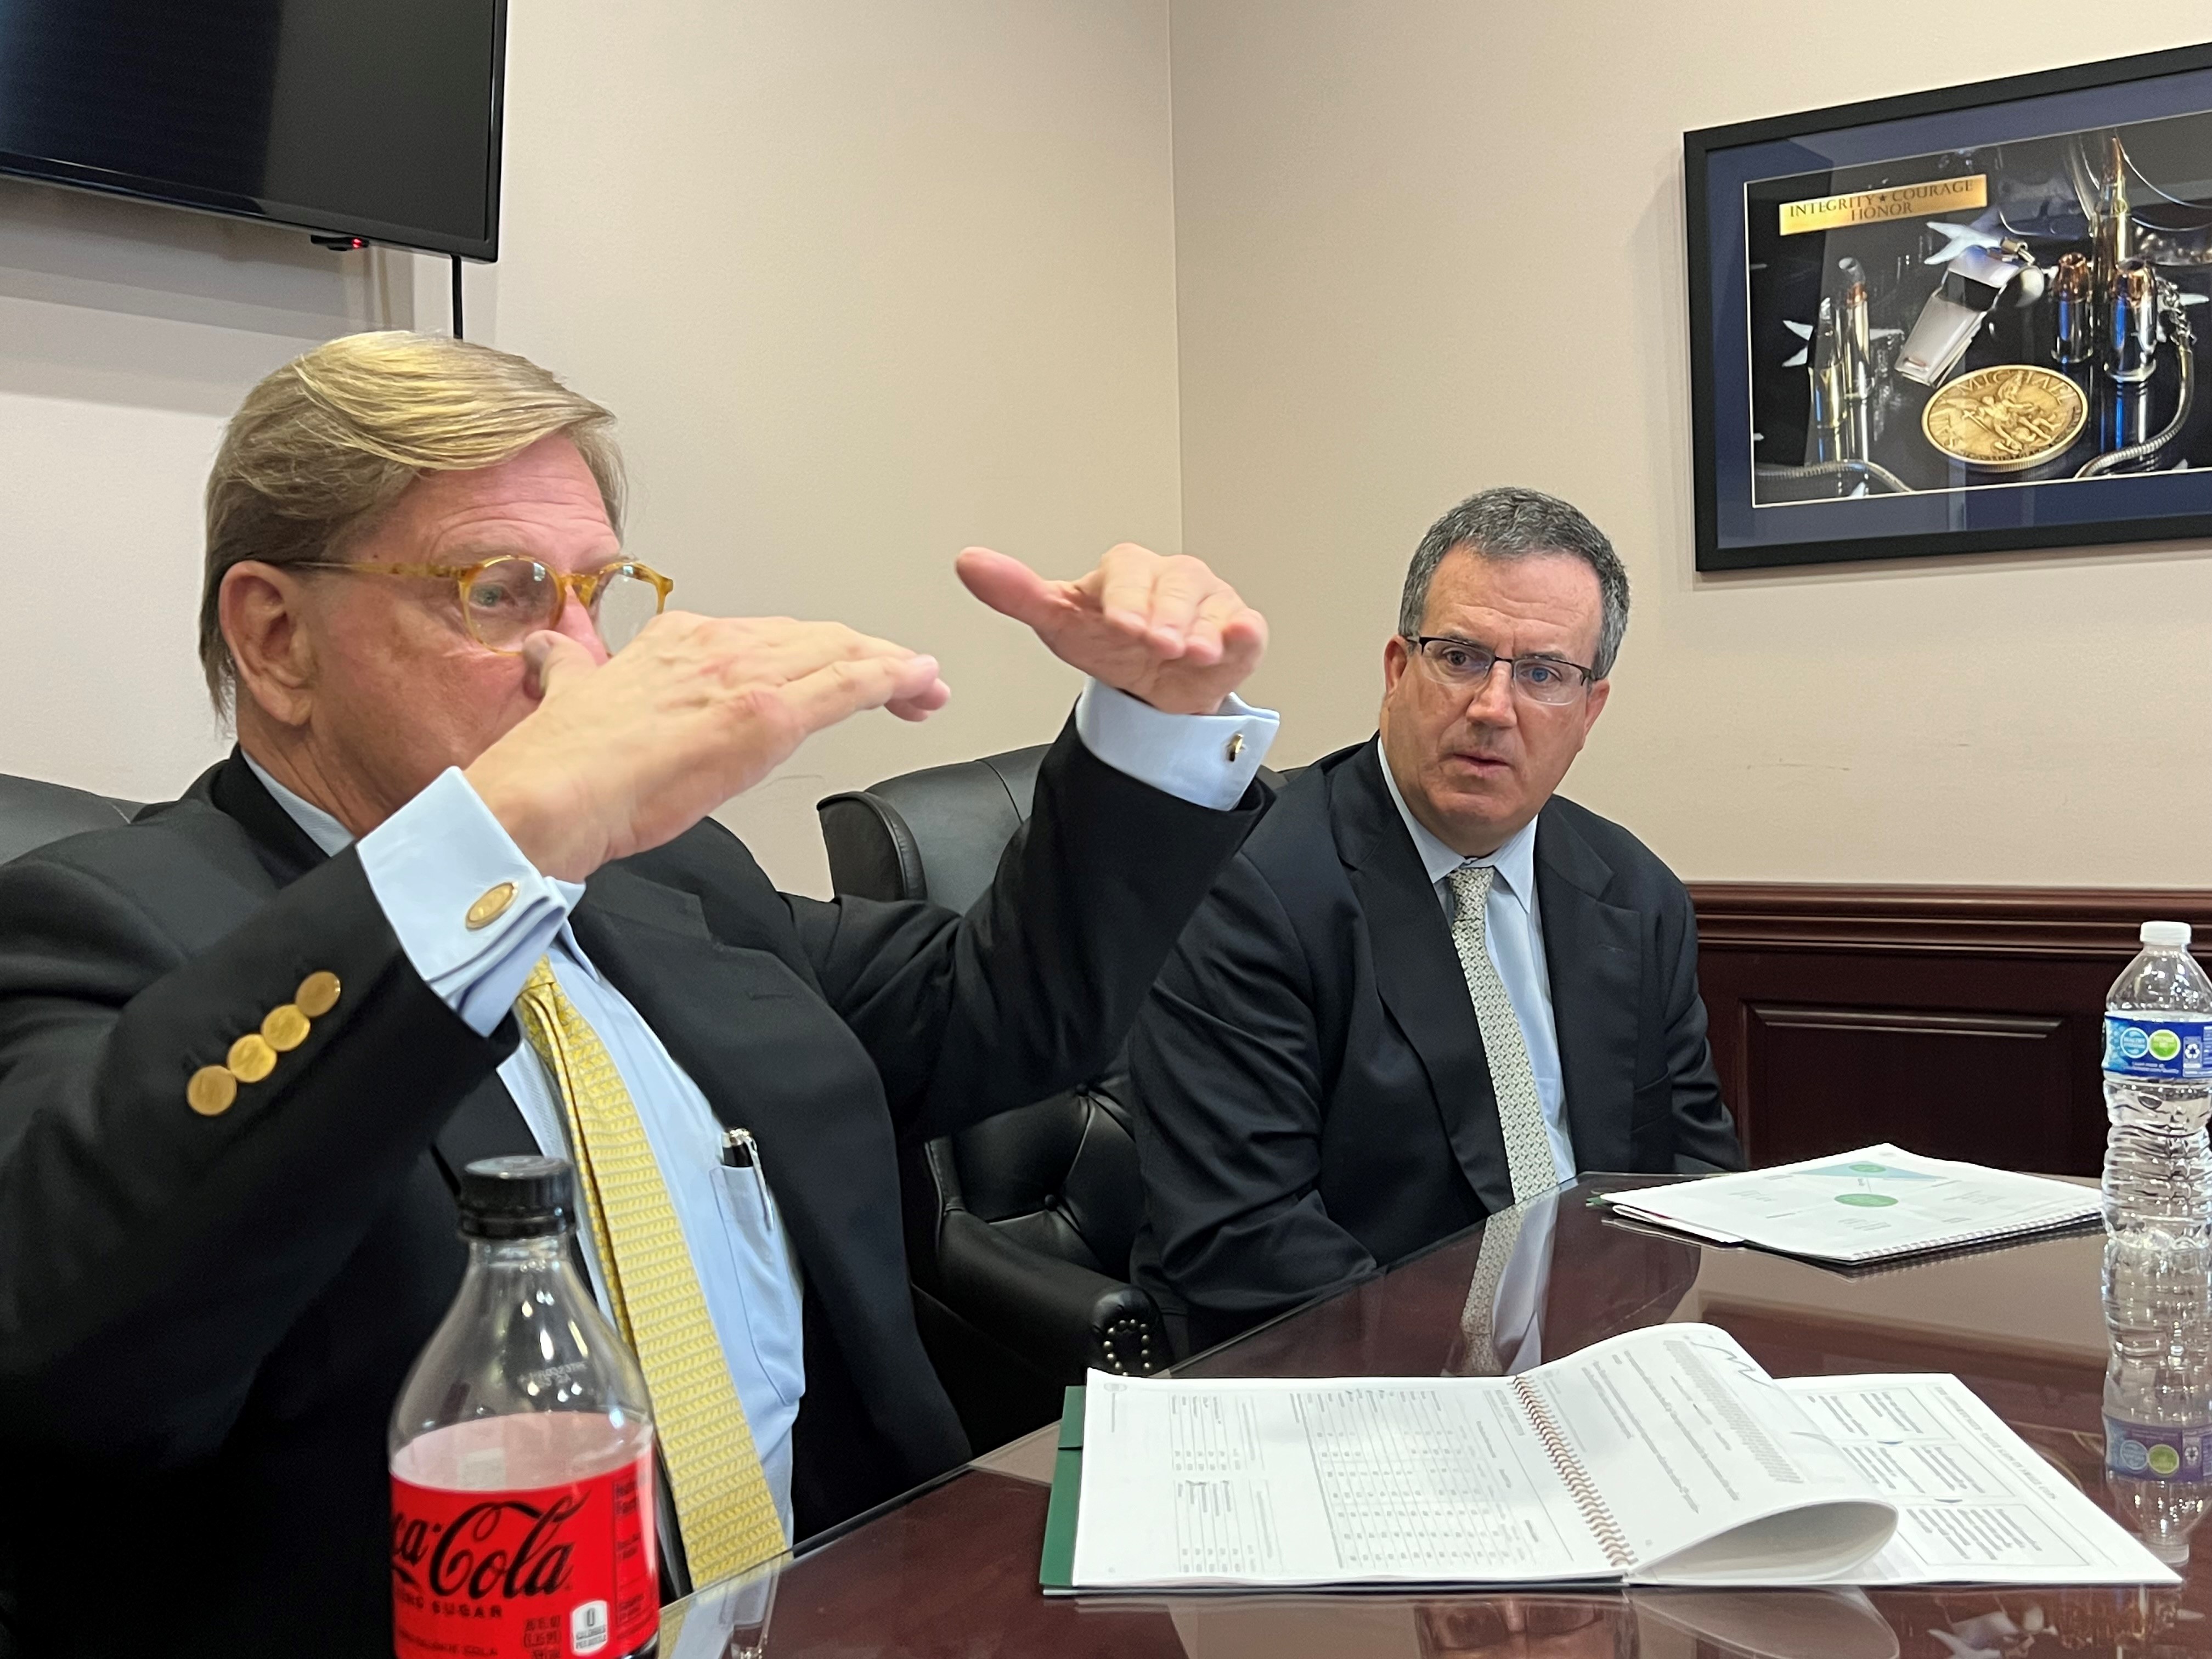 April 14th, 2023: Mr. Jim McClure, CFA of Barrow Hanley Global Investors (pictured left) provided an update on the Fund's - Small Cap Value Strategy. Since the inception date of May 03, 2021, the portfolio has beaten the benchmark by a stellar 567 basis points. Job Well Done!